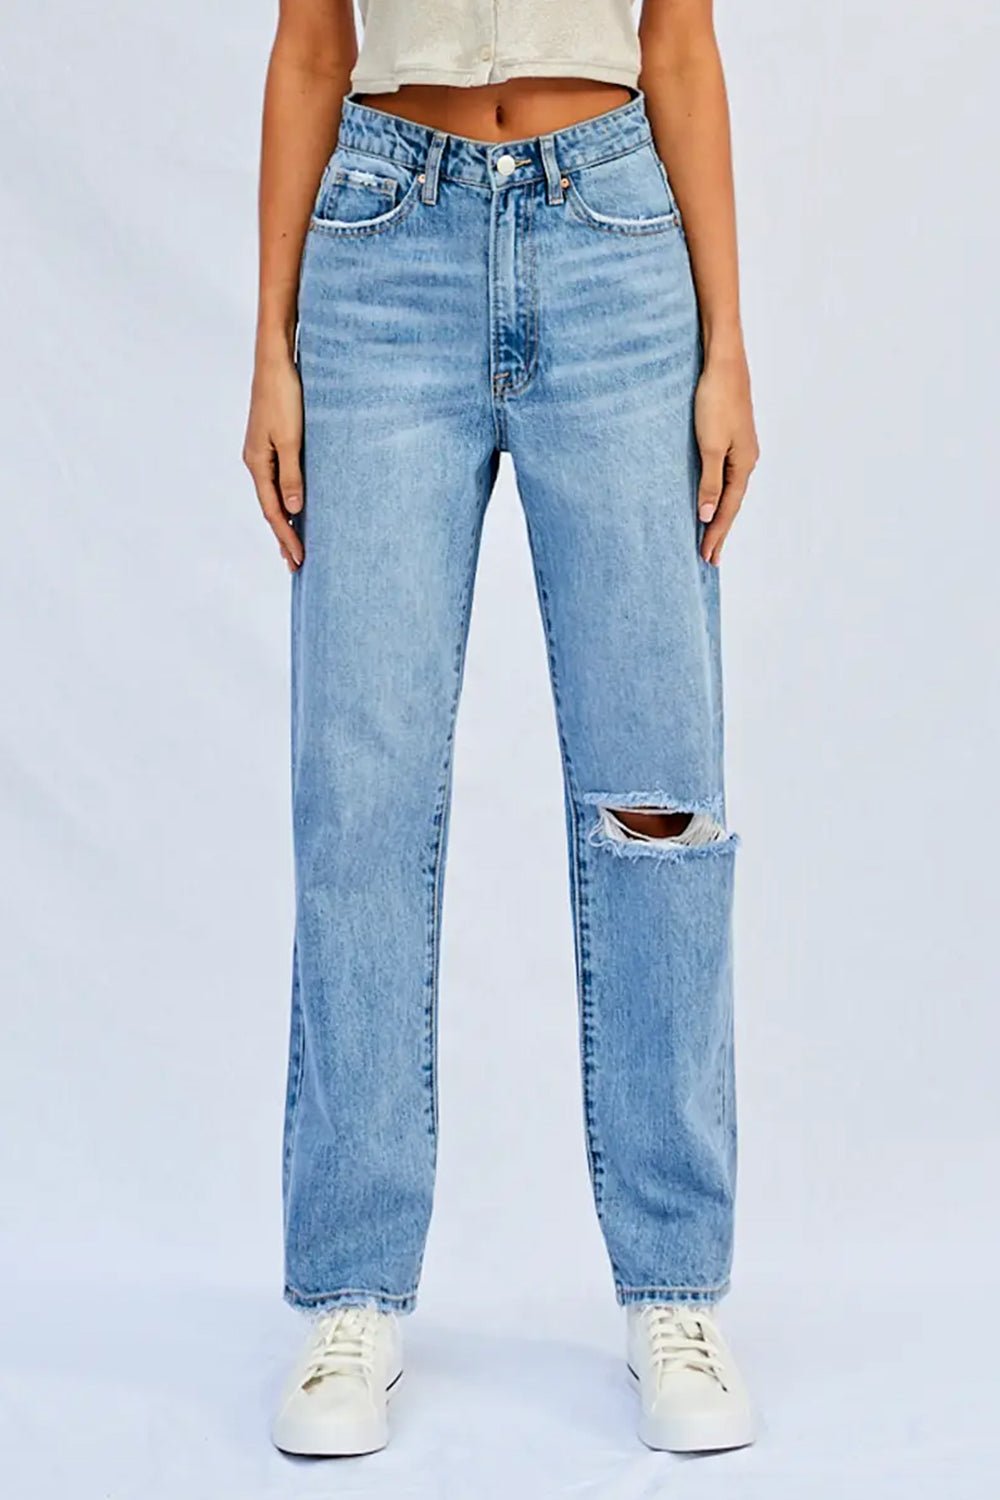 Insane Gene High Rise Ripped Straight Jeans – The Green Brick Boutique